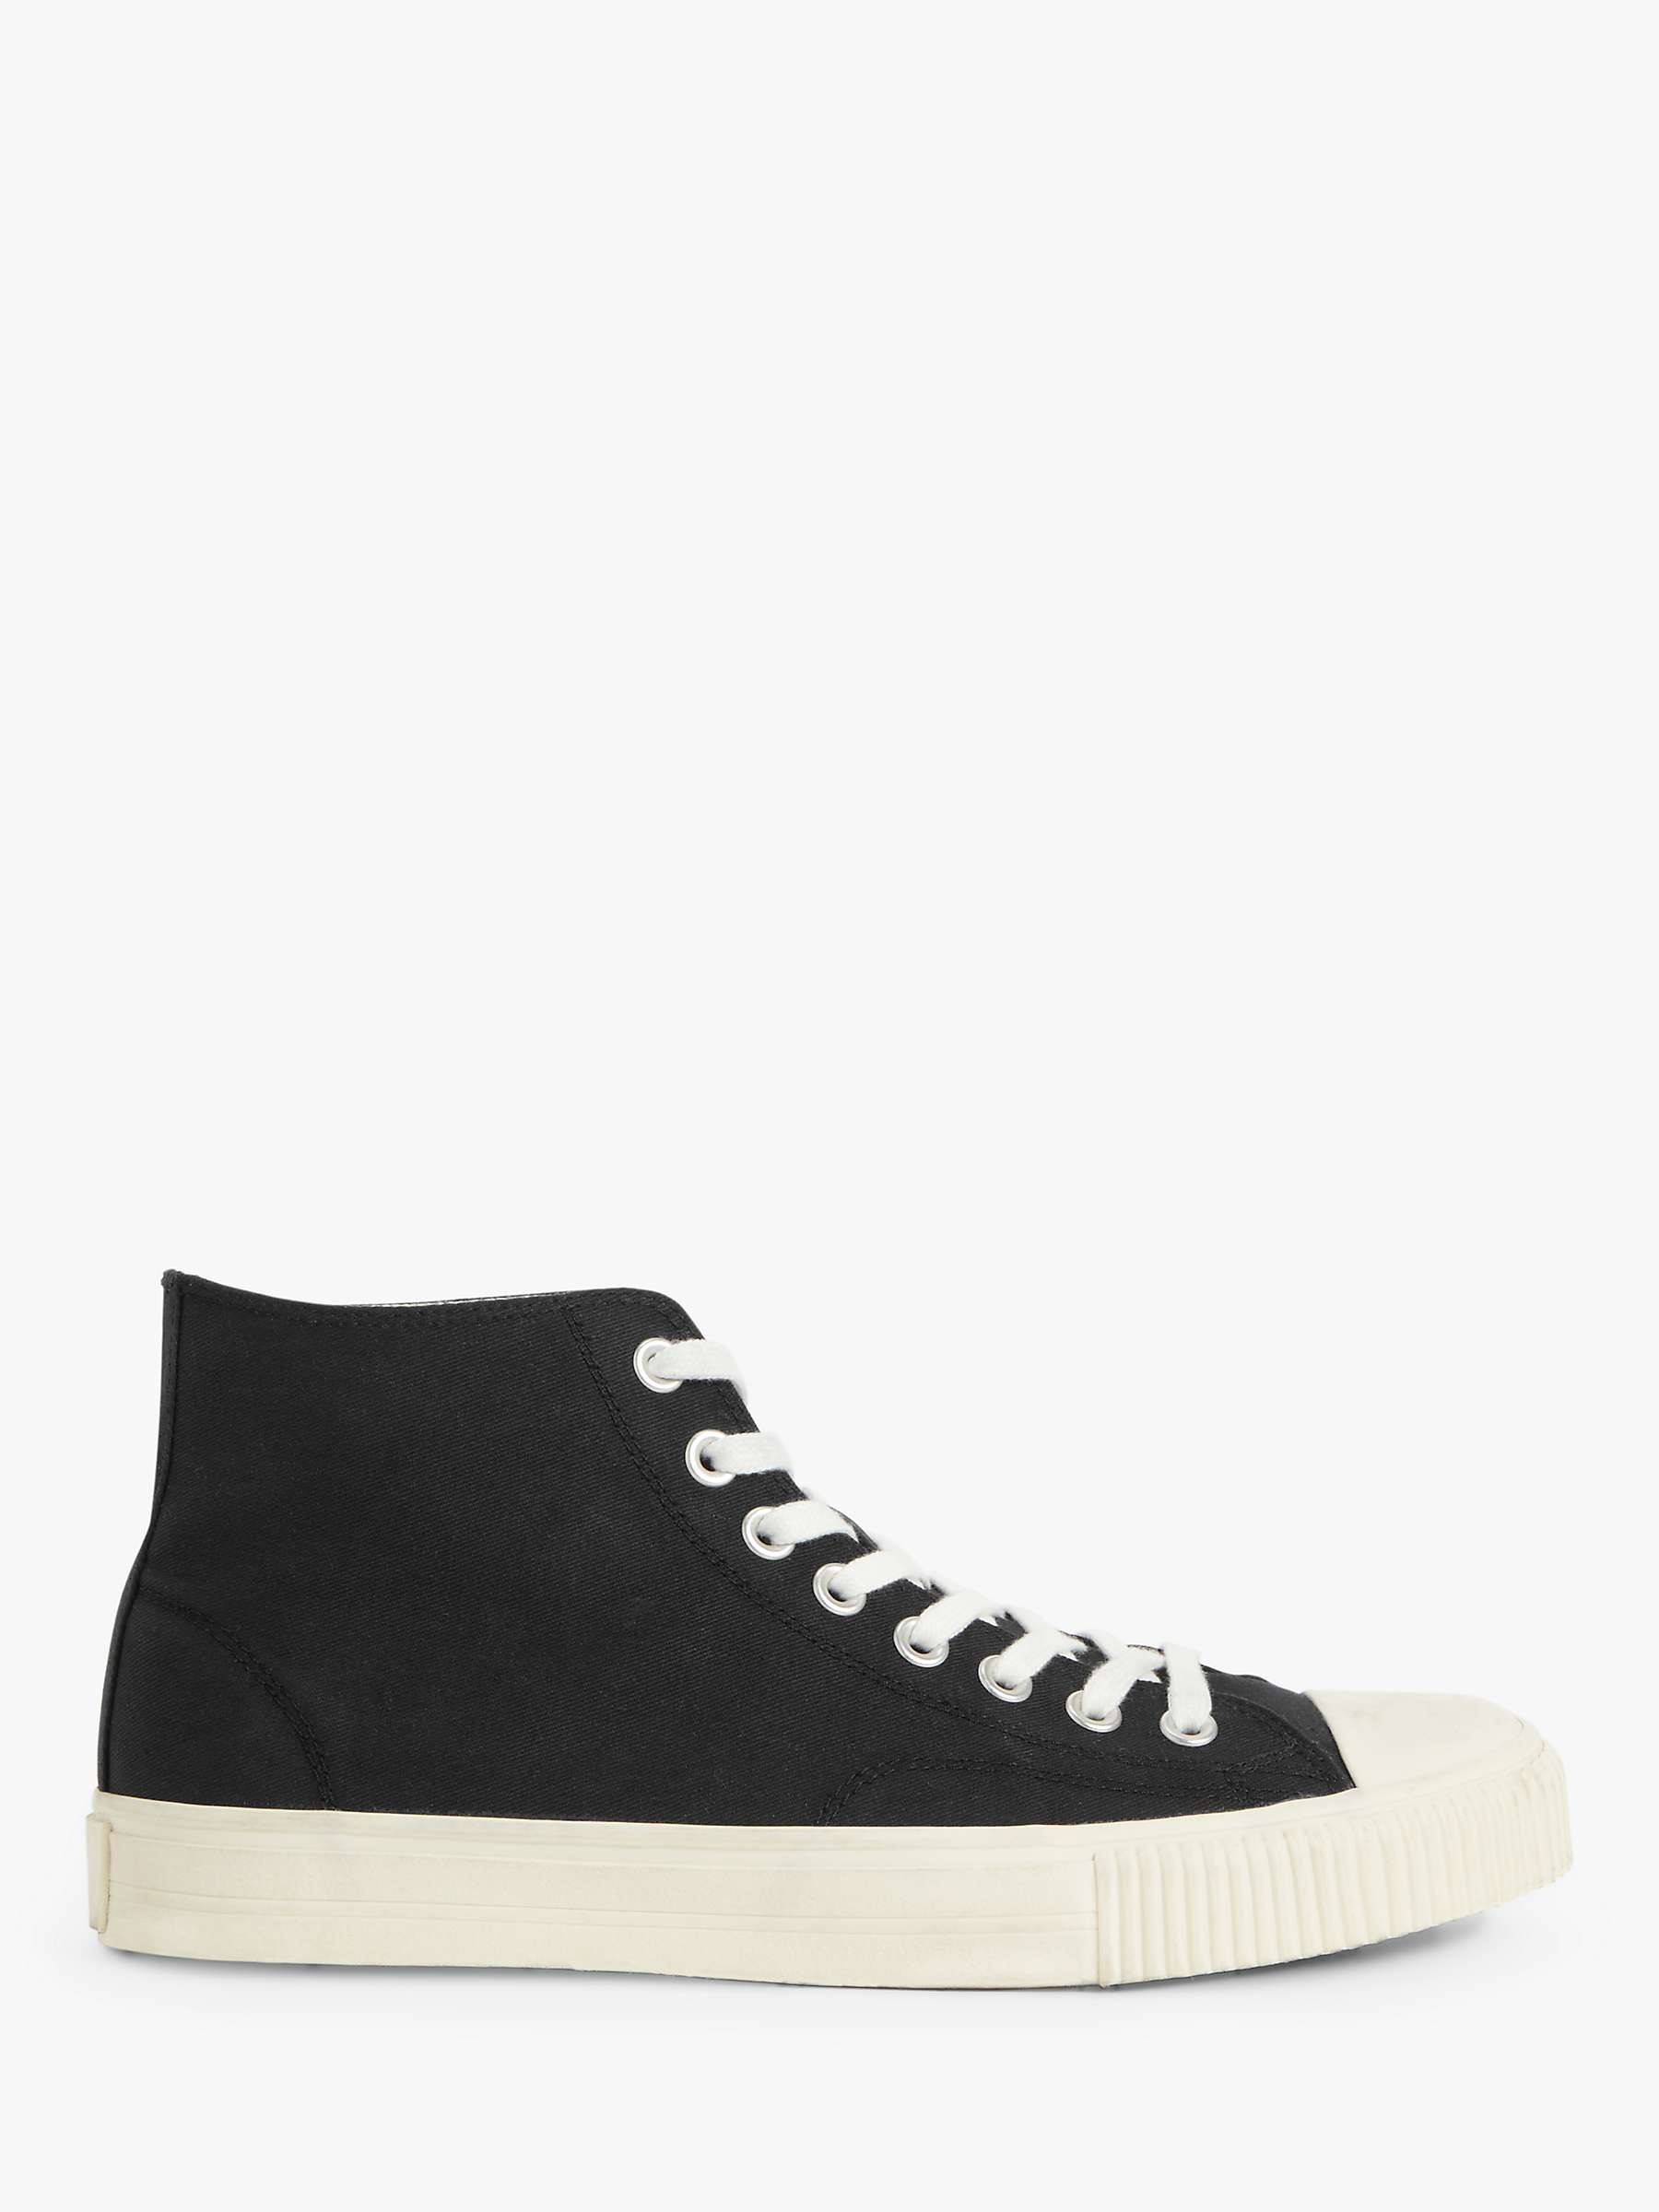 John Lewis ANYDAY Canvas Hi-Top Trainers, Black at John Lewis & Partners